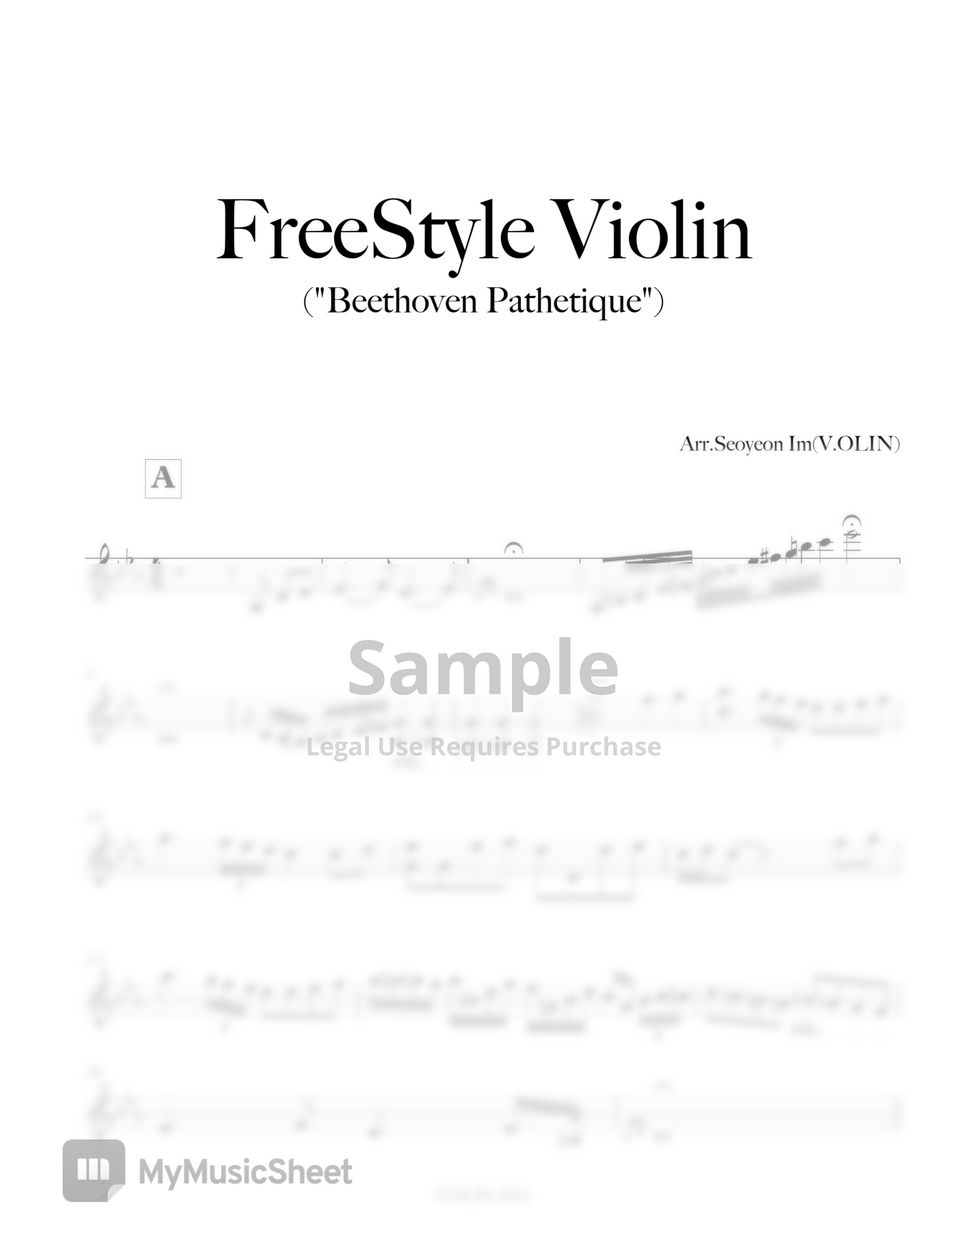 Beethoven - Pathetique (Free Style Violin) by V.OLIN